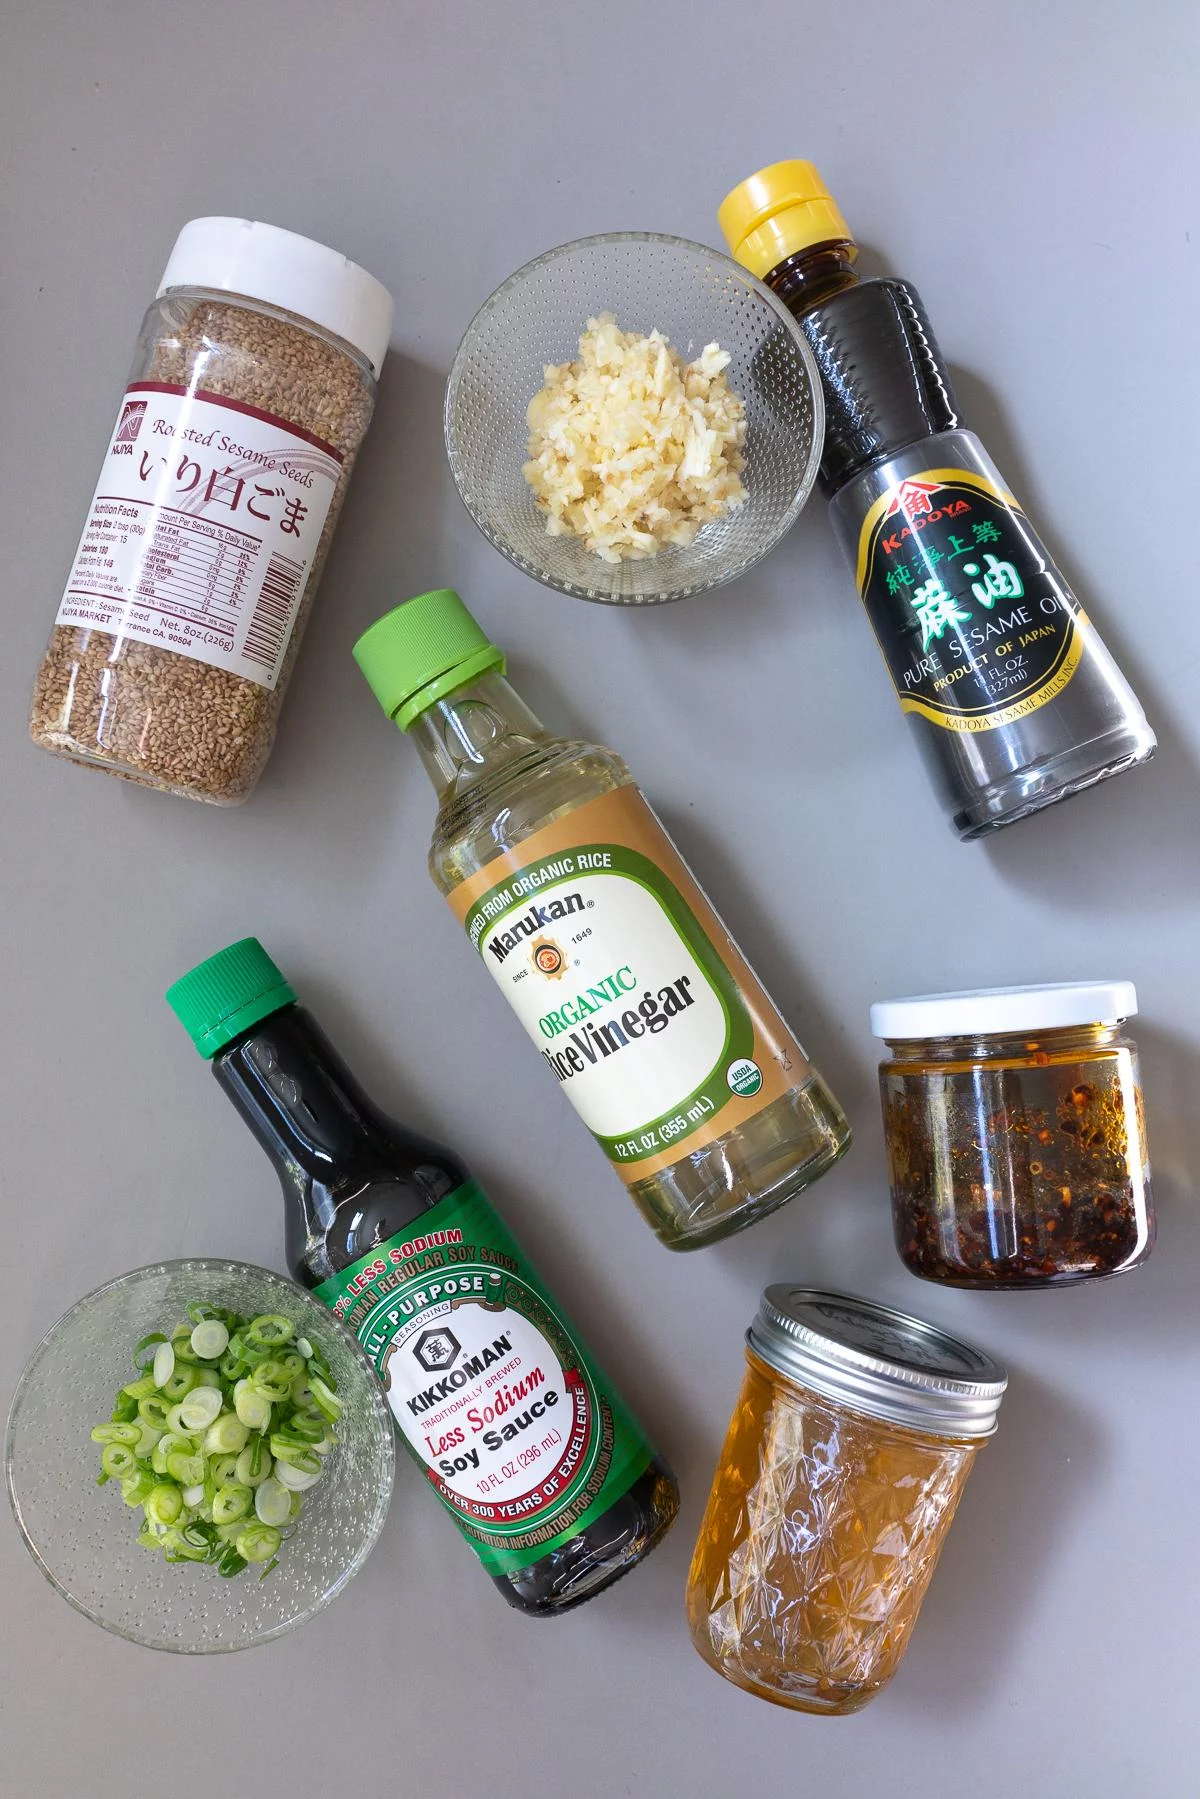 Ingredients for Dumpling Dipping Sauce (soy sauce, rice vinegar, sesame oil, chili oil, honey, sesame seeds, garlic, and green onions)